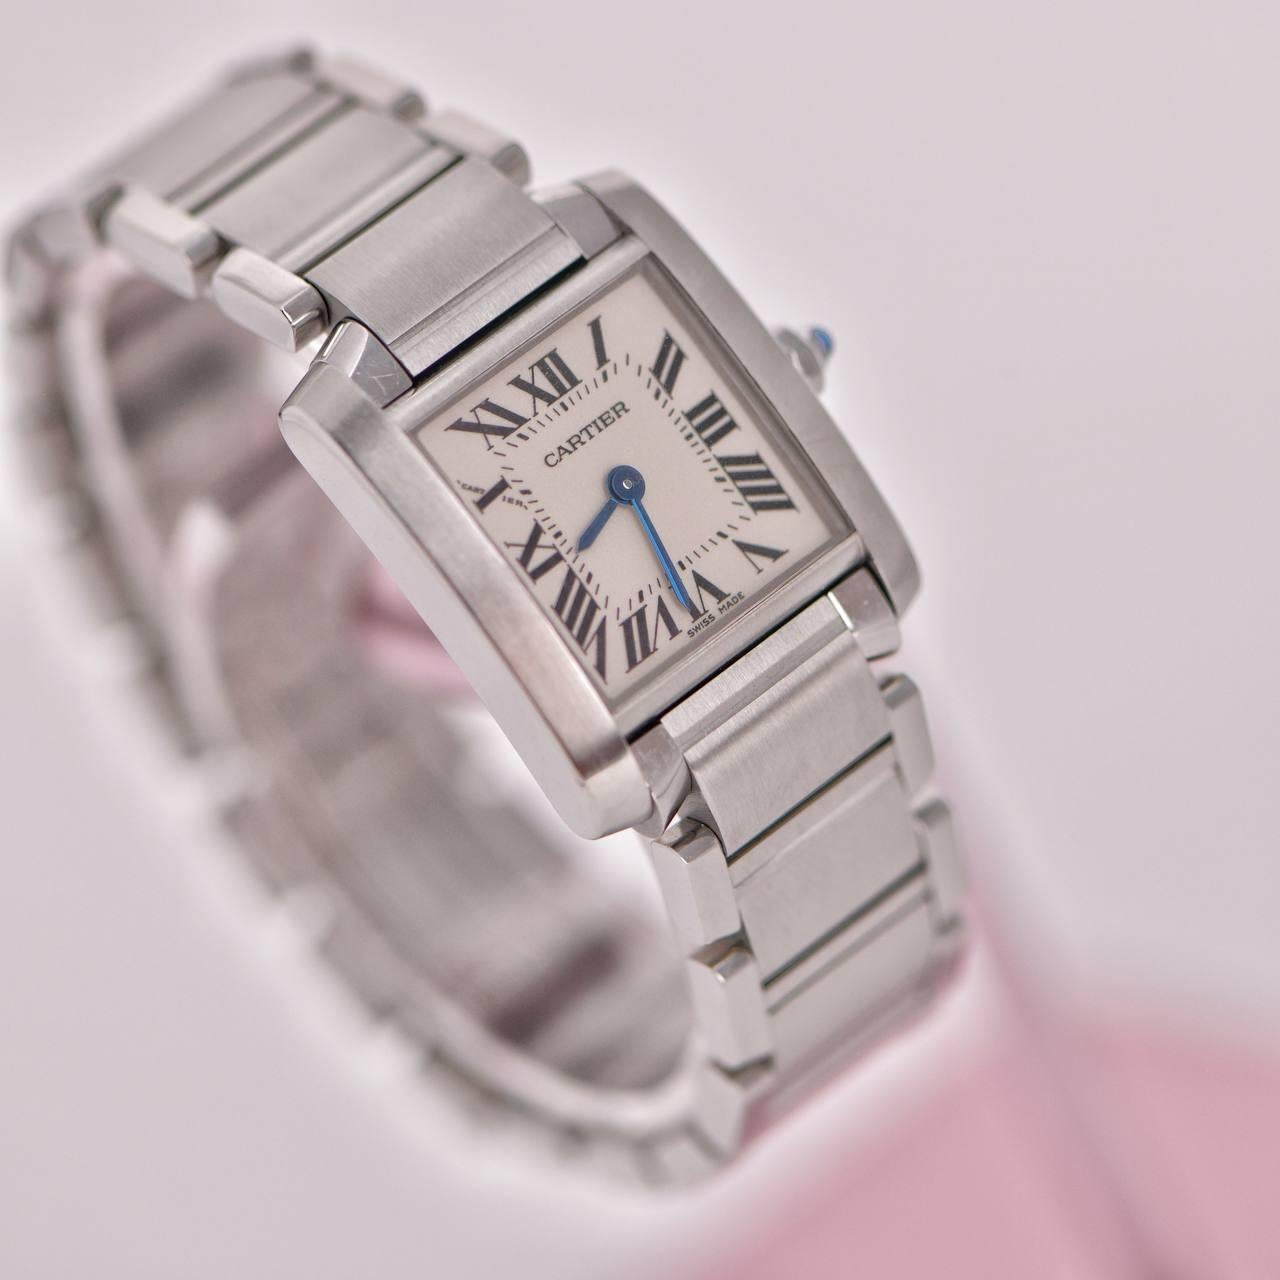 SKU AT-1813
Brand Cartier
Model No. W51011Q3
Retail Price £3,550 incl. VAT / $3,700 / €4 000 incl. VAT
____________________________________
Date Circa 2009
Gender Unisex / Women
Box/Papers	NO
____________________________________
Condition 
Case -